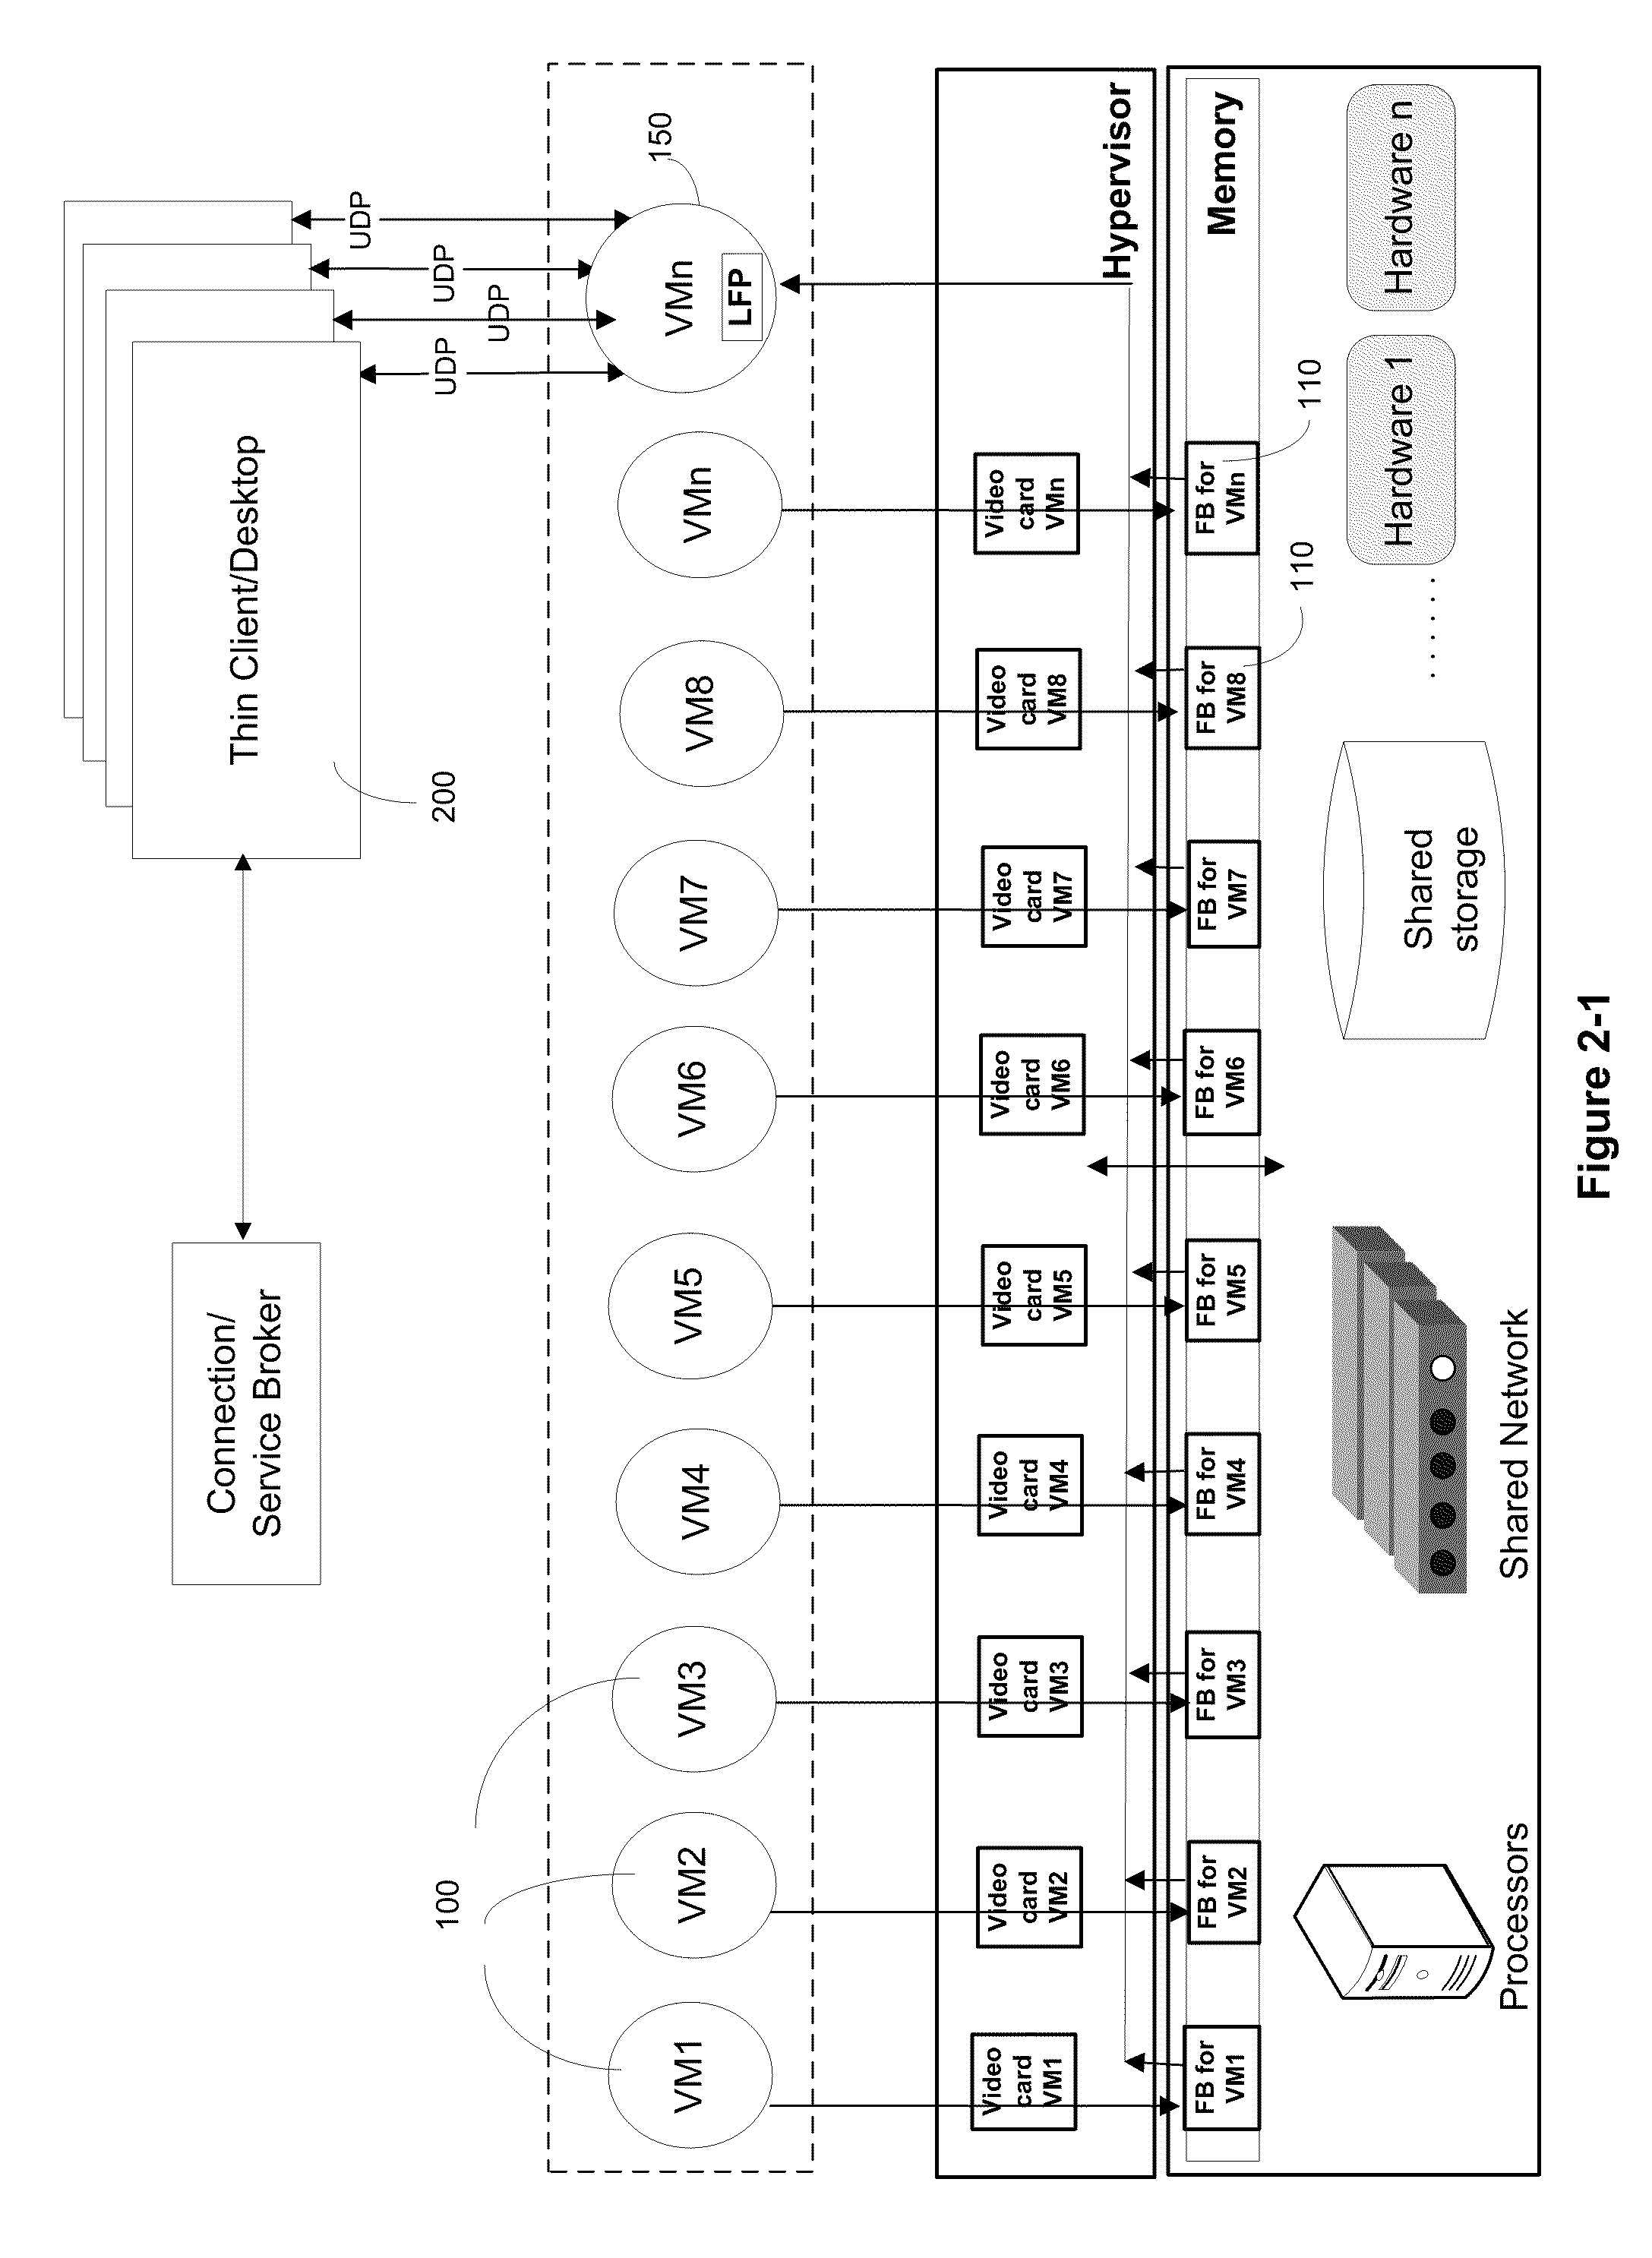 Systems and Algorithm For Interfacing With A Virtualized Computing Service Over A Network Using A Lightweight Client